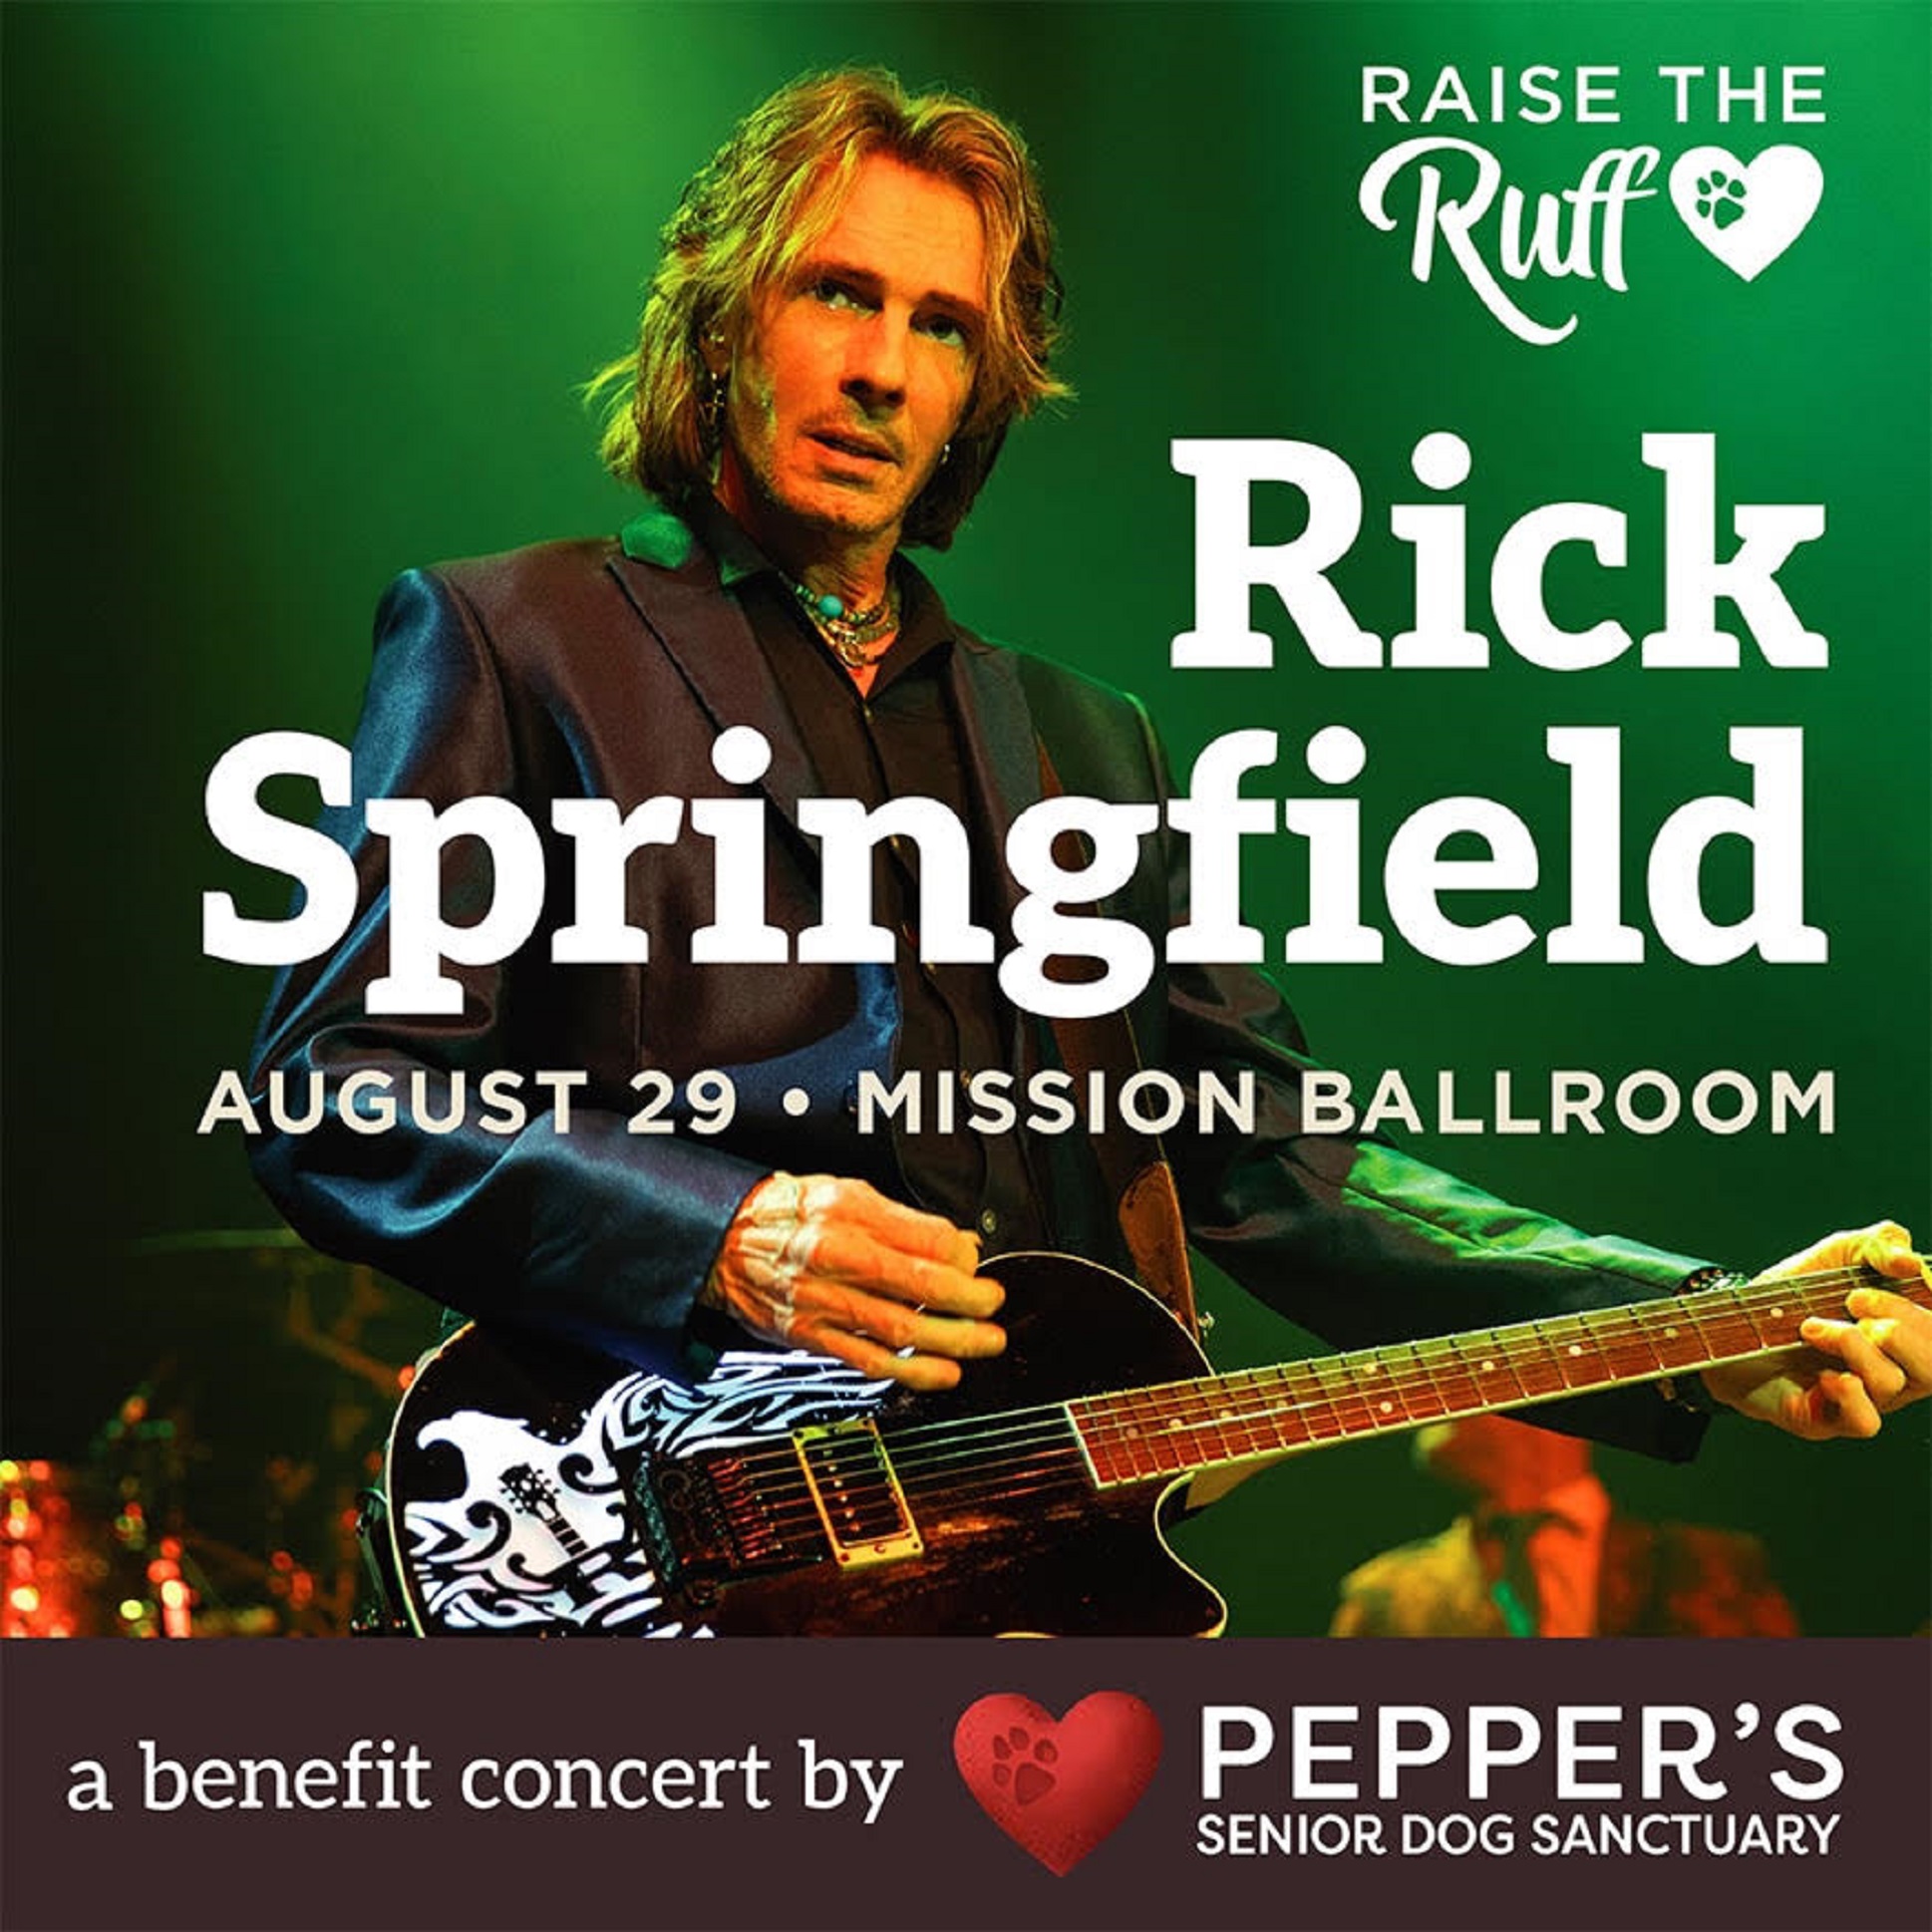 RICK SPRINGFIELD ANNOUNCED AS THE FEATURED ENTERTAINER AT RAISE THE RUFF, AN EVENING BENEFITING PEPPER’S SENIOR DOG SANCTUARY